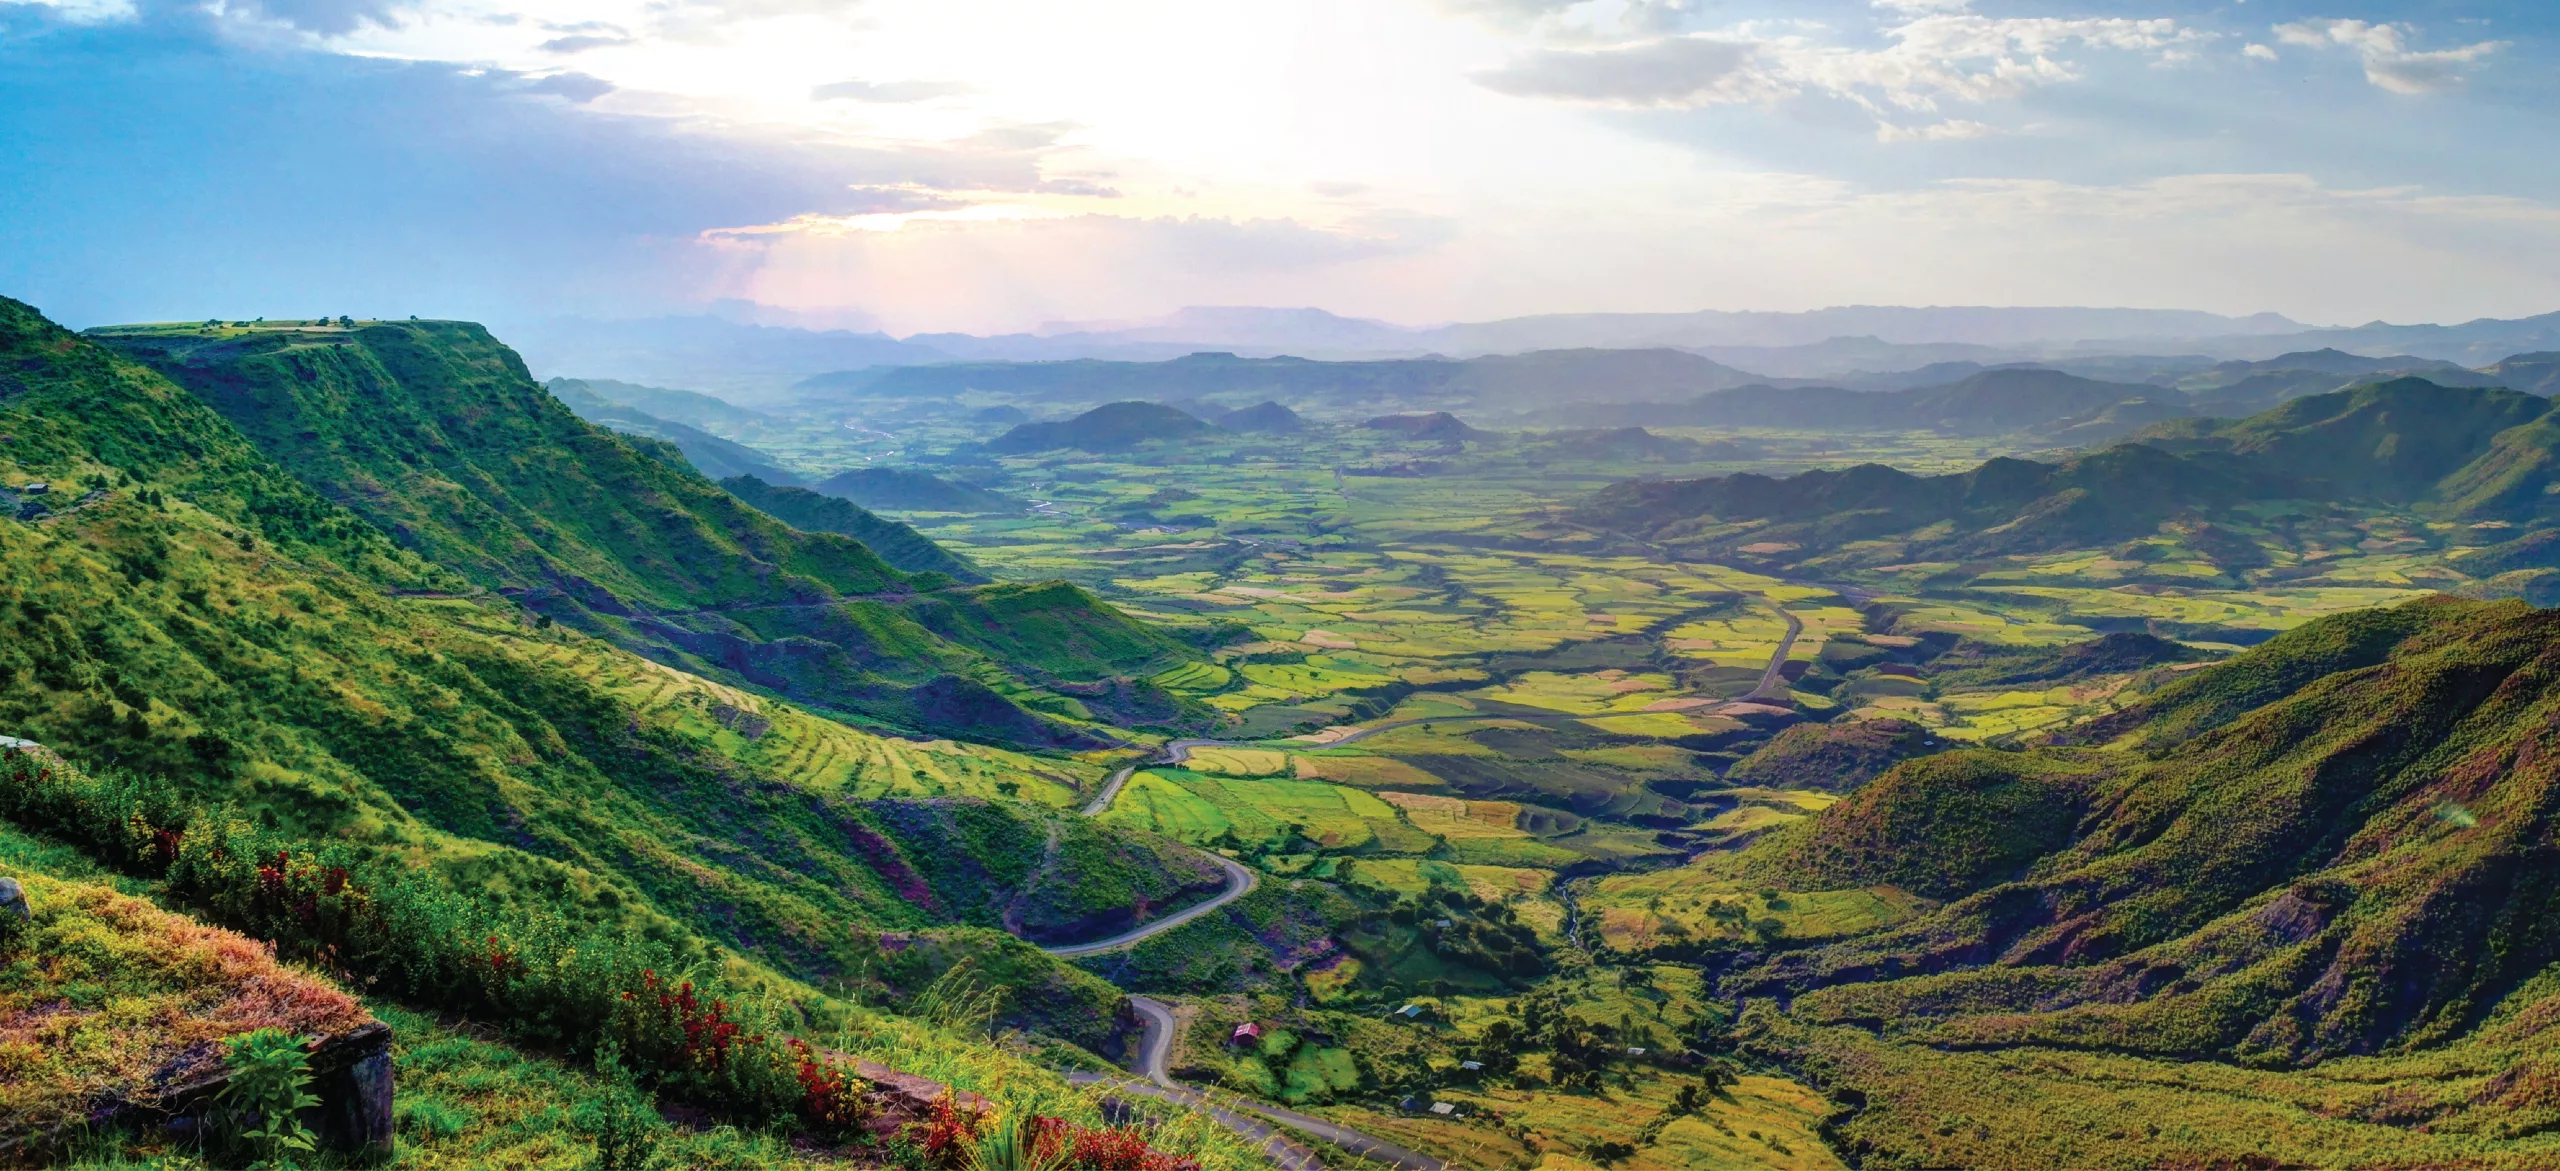 Top 3 Places to Visit in Ethiopia’s Enchanting Land!